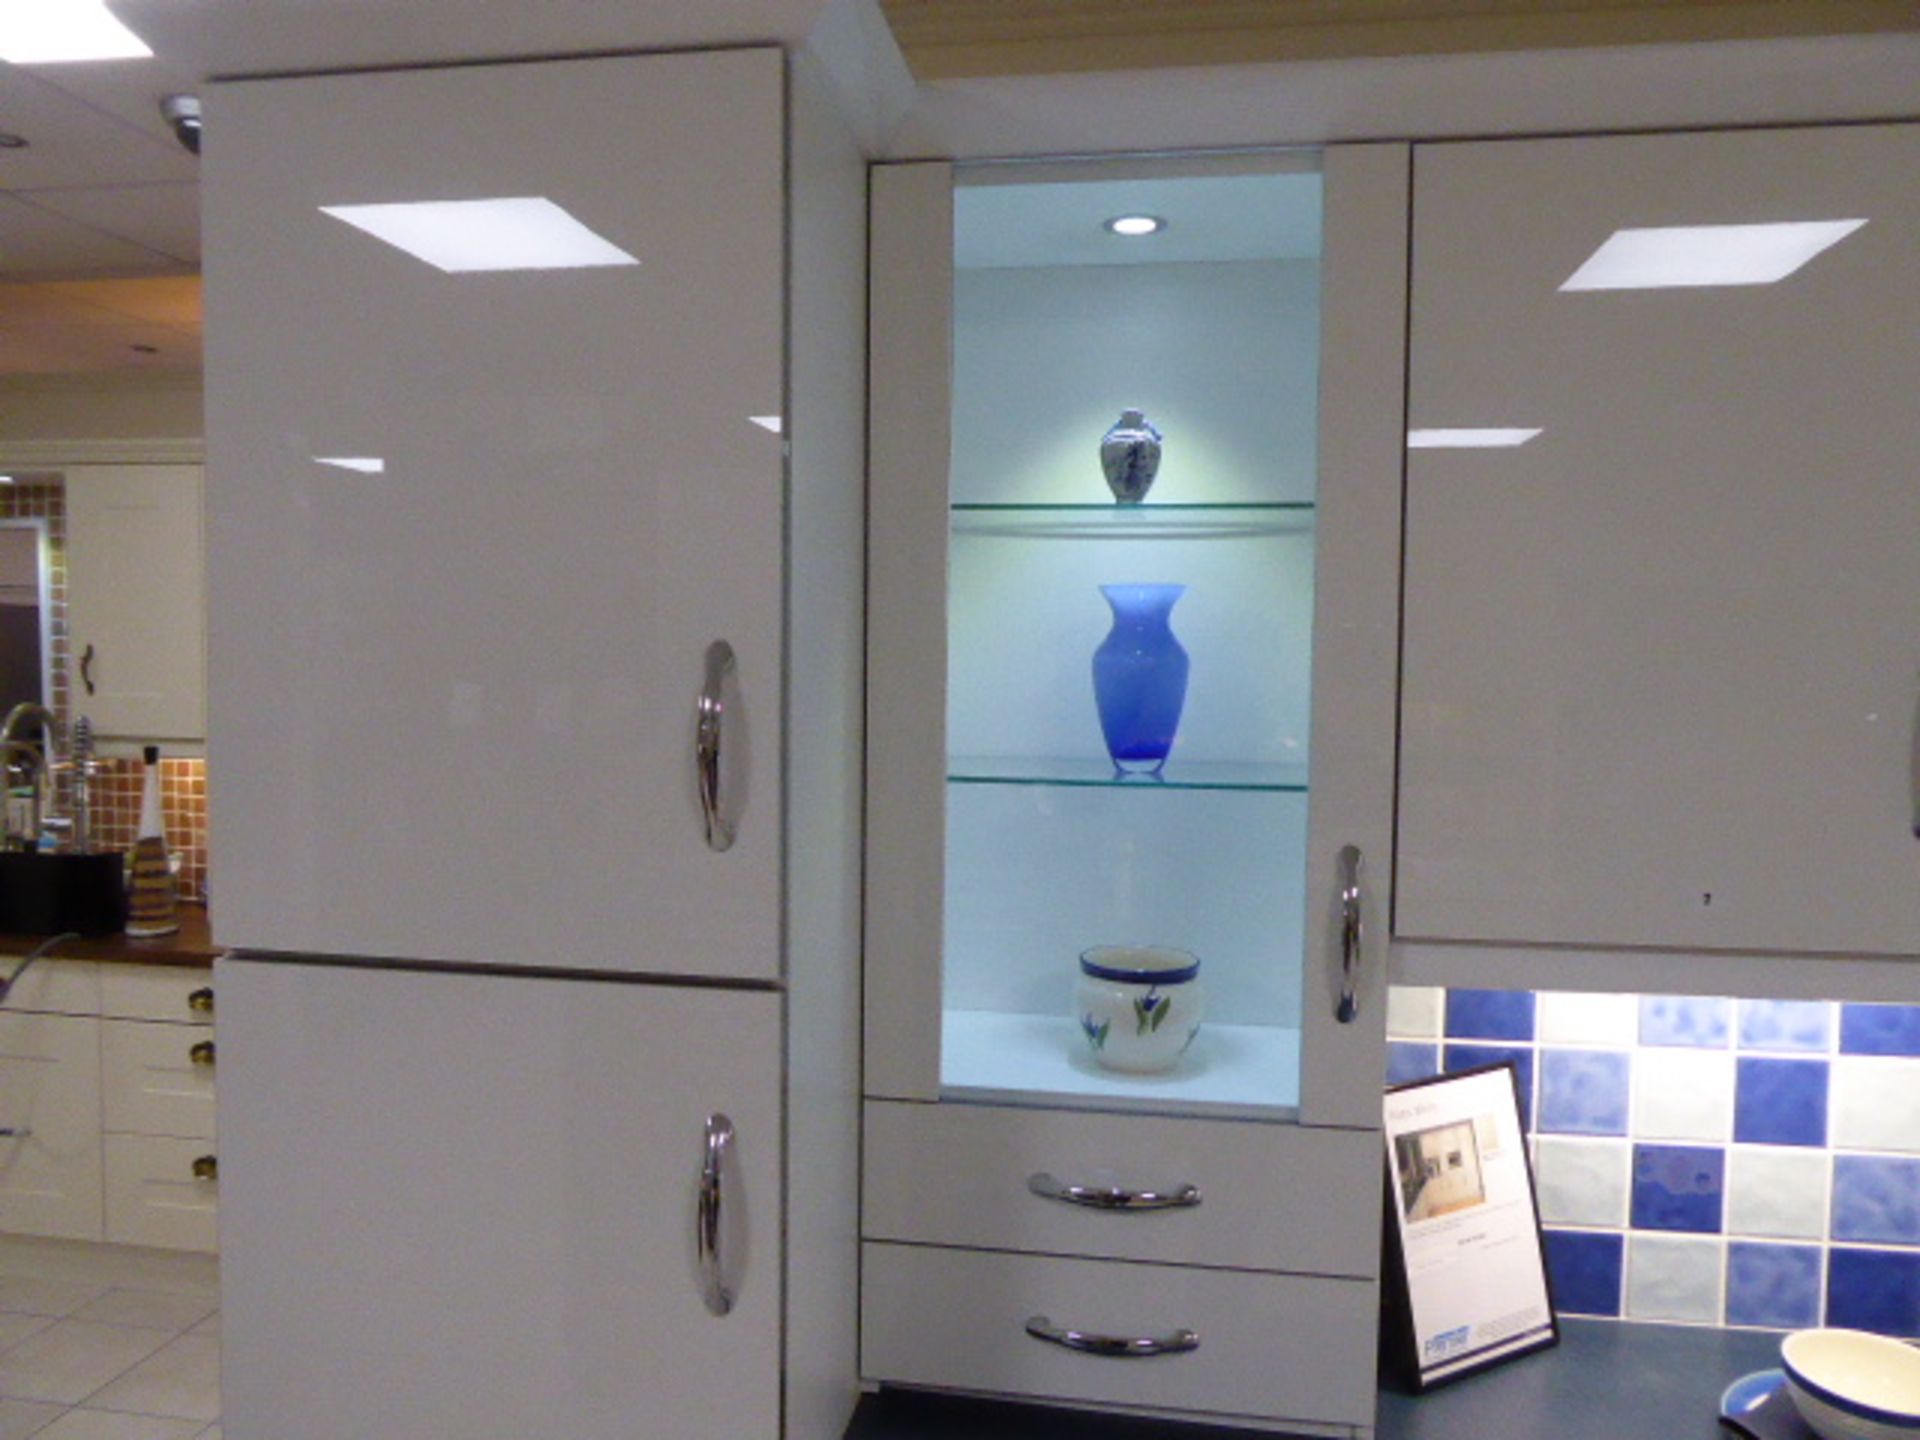 Roma White kitchen in L-shape with a blue granite effect worktop. Max dimensions 240cm by 130cm - Image 3 of 4